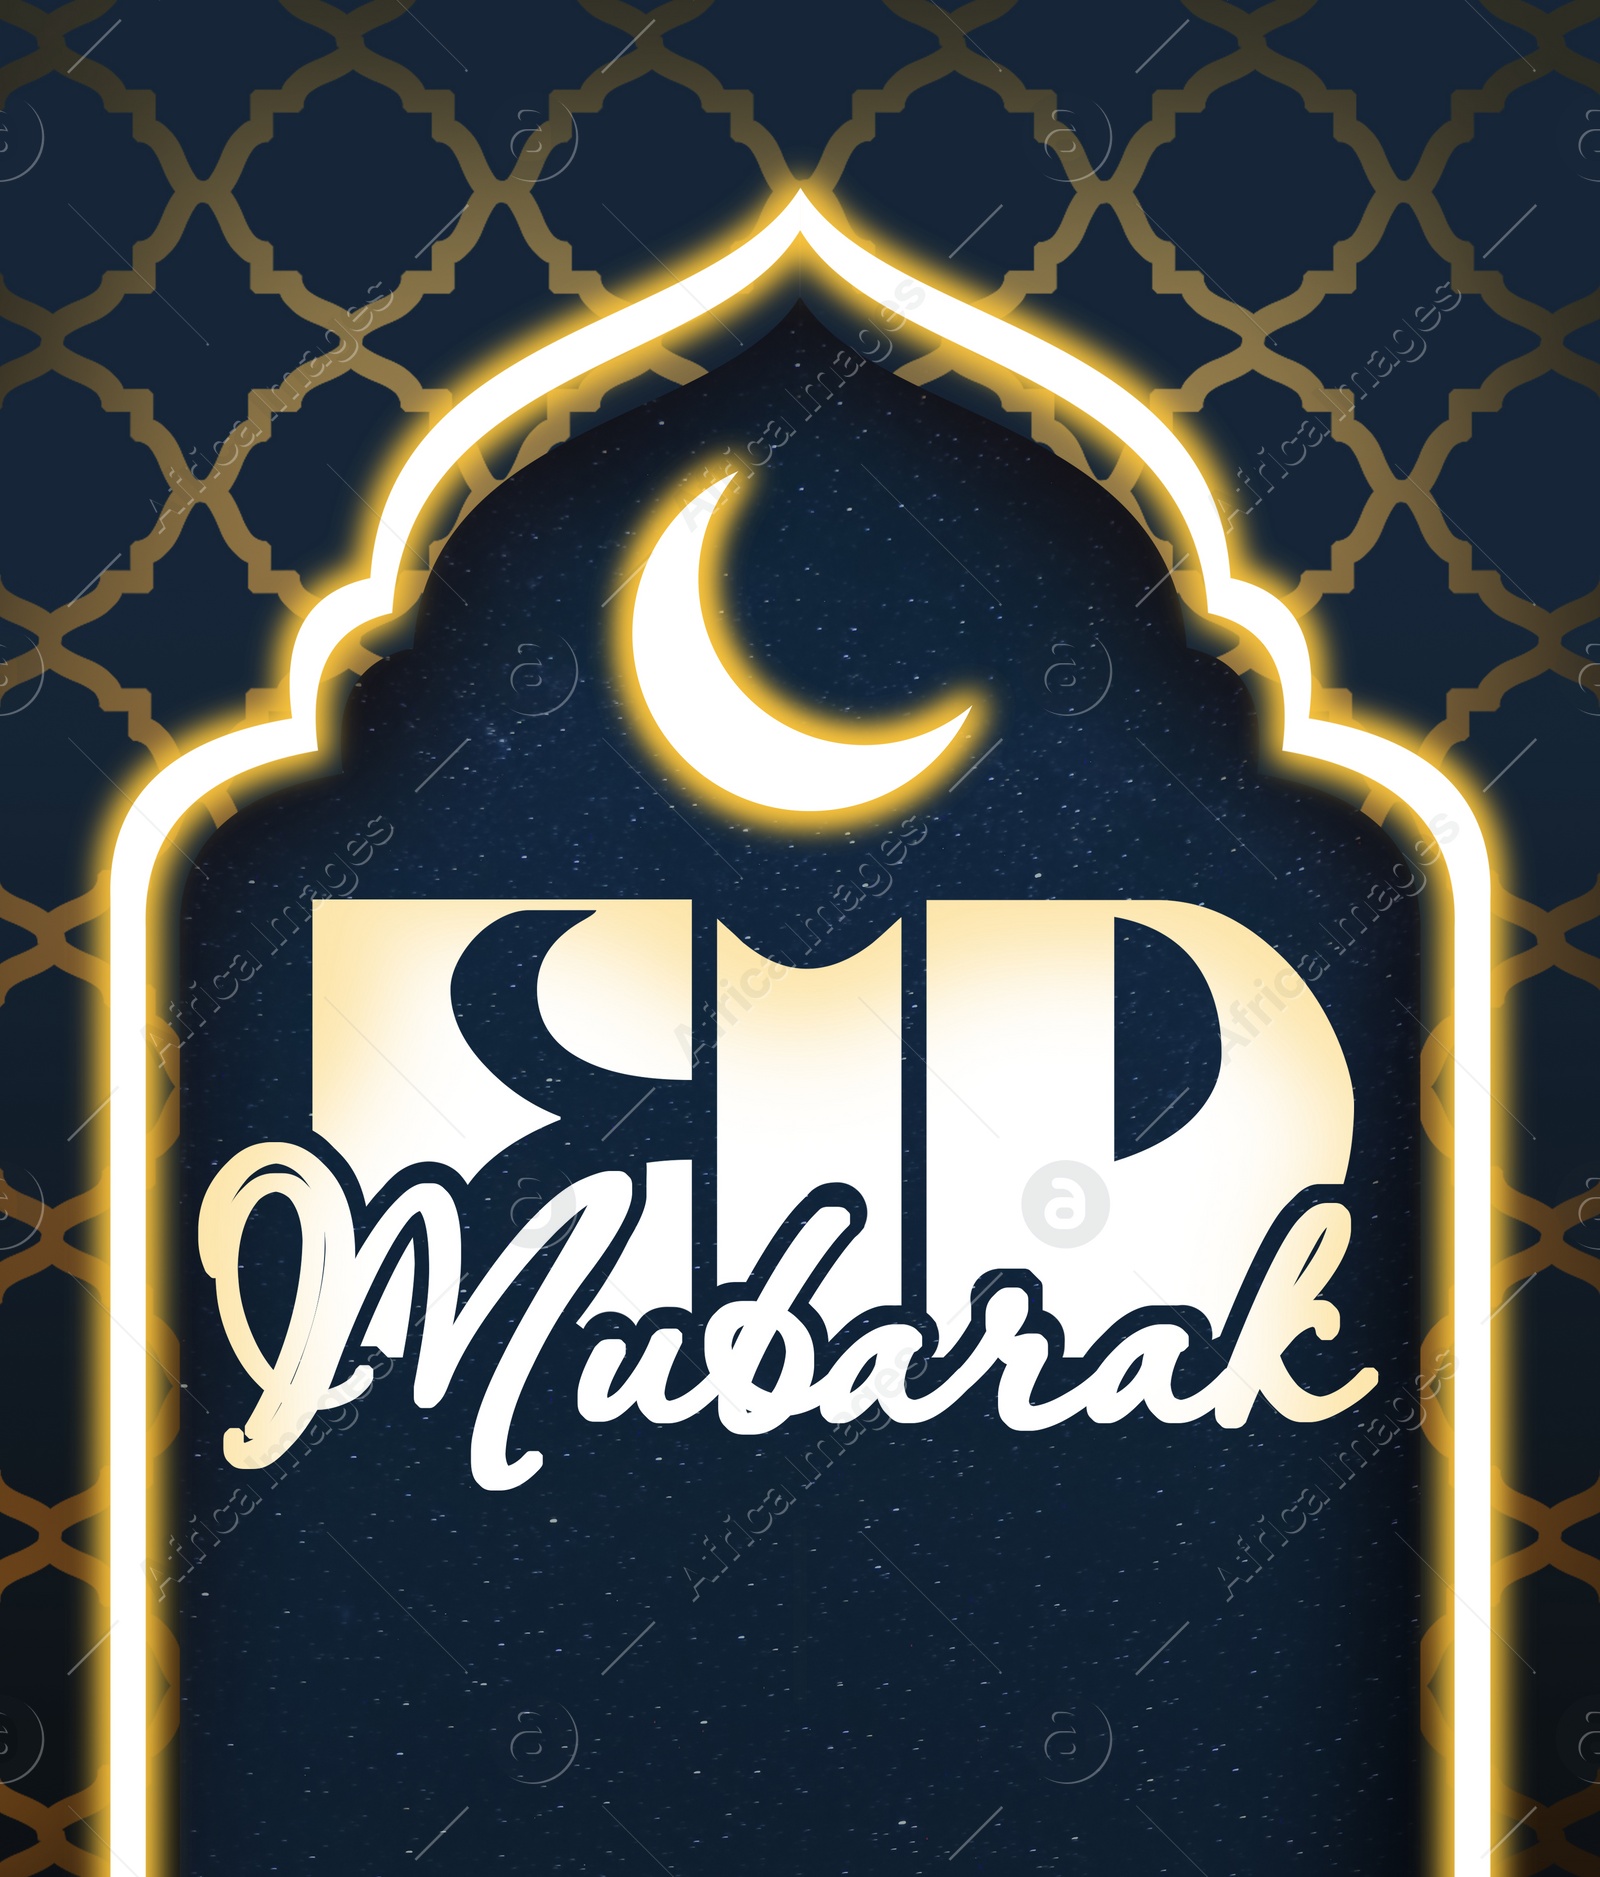 Illustration of Eid Mubarak greeting card with illustration of crescent moon and mosque outline on dark blue background